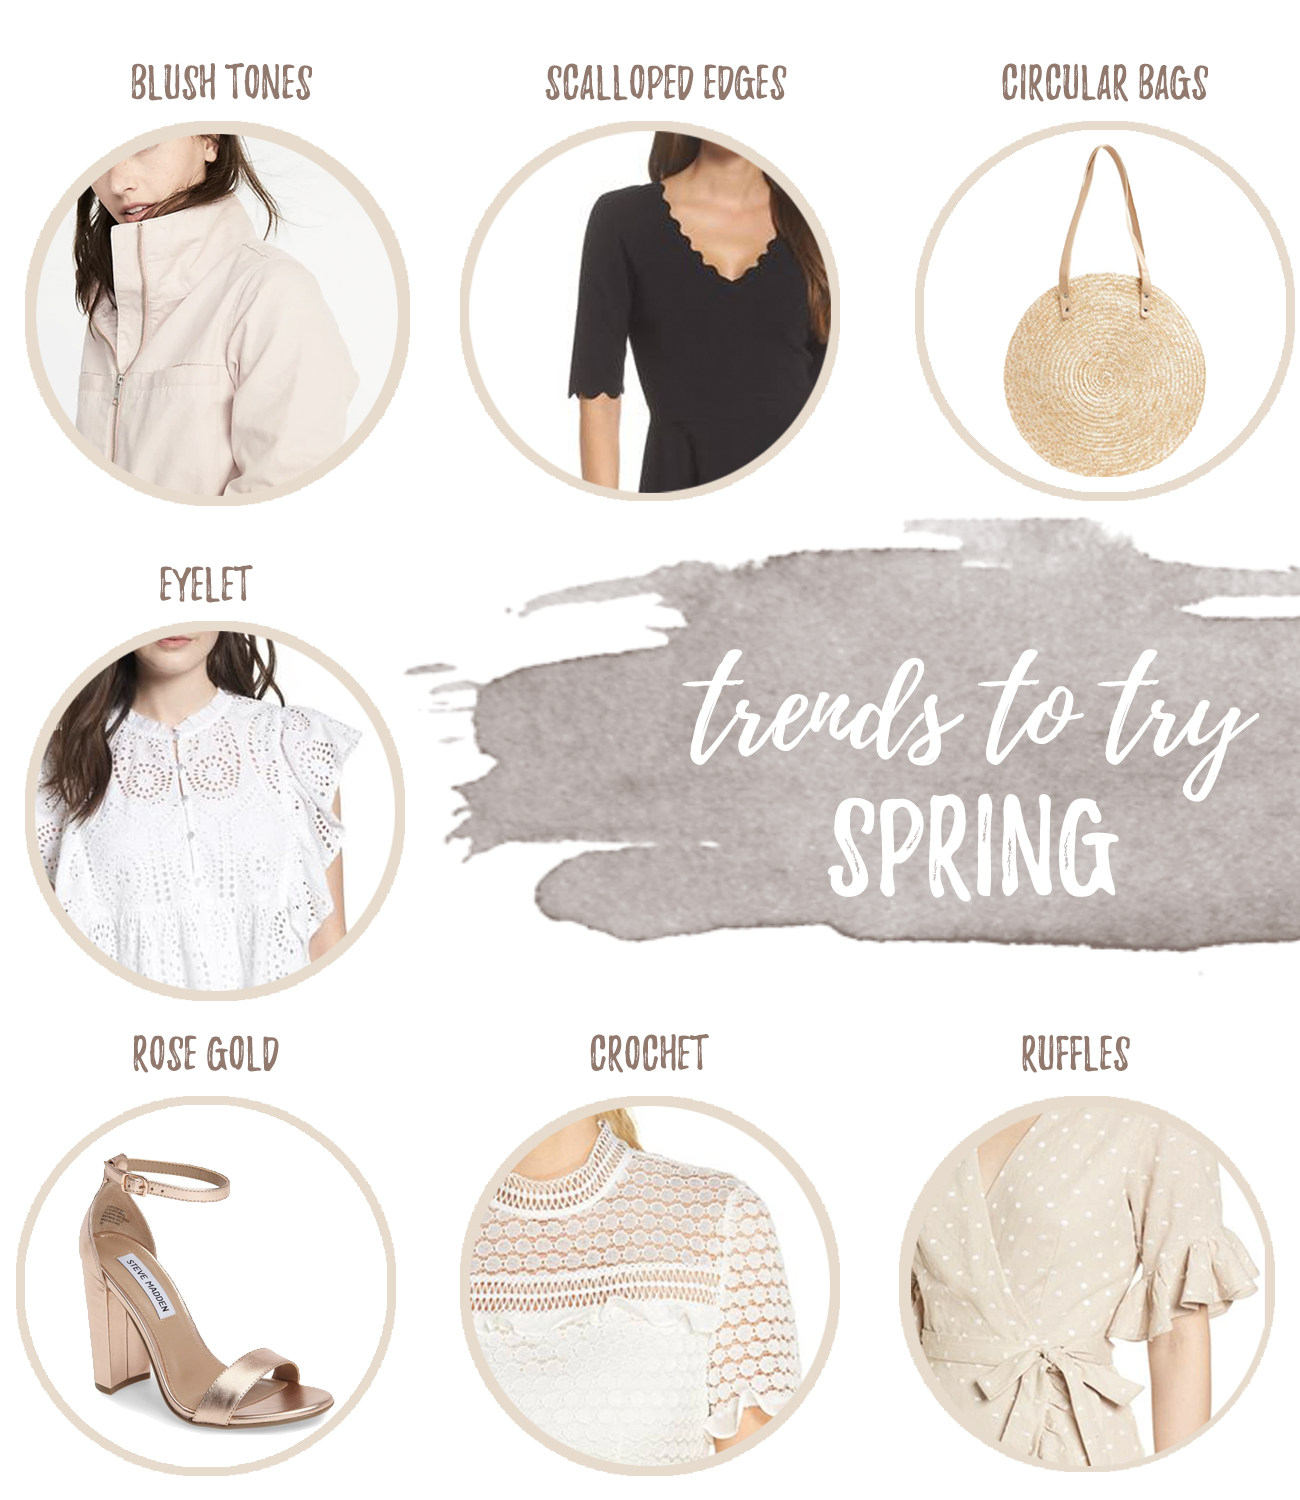 Not Too Trendy Spring Trends 2018 | Pinteresting Plans, a Connecticut Style Blog